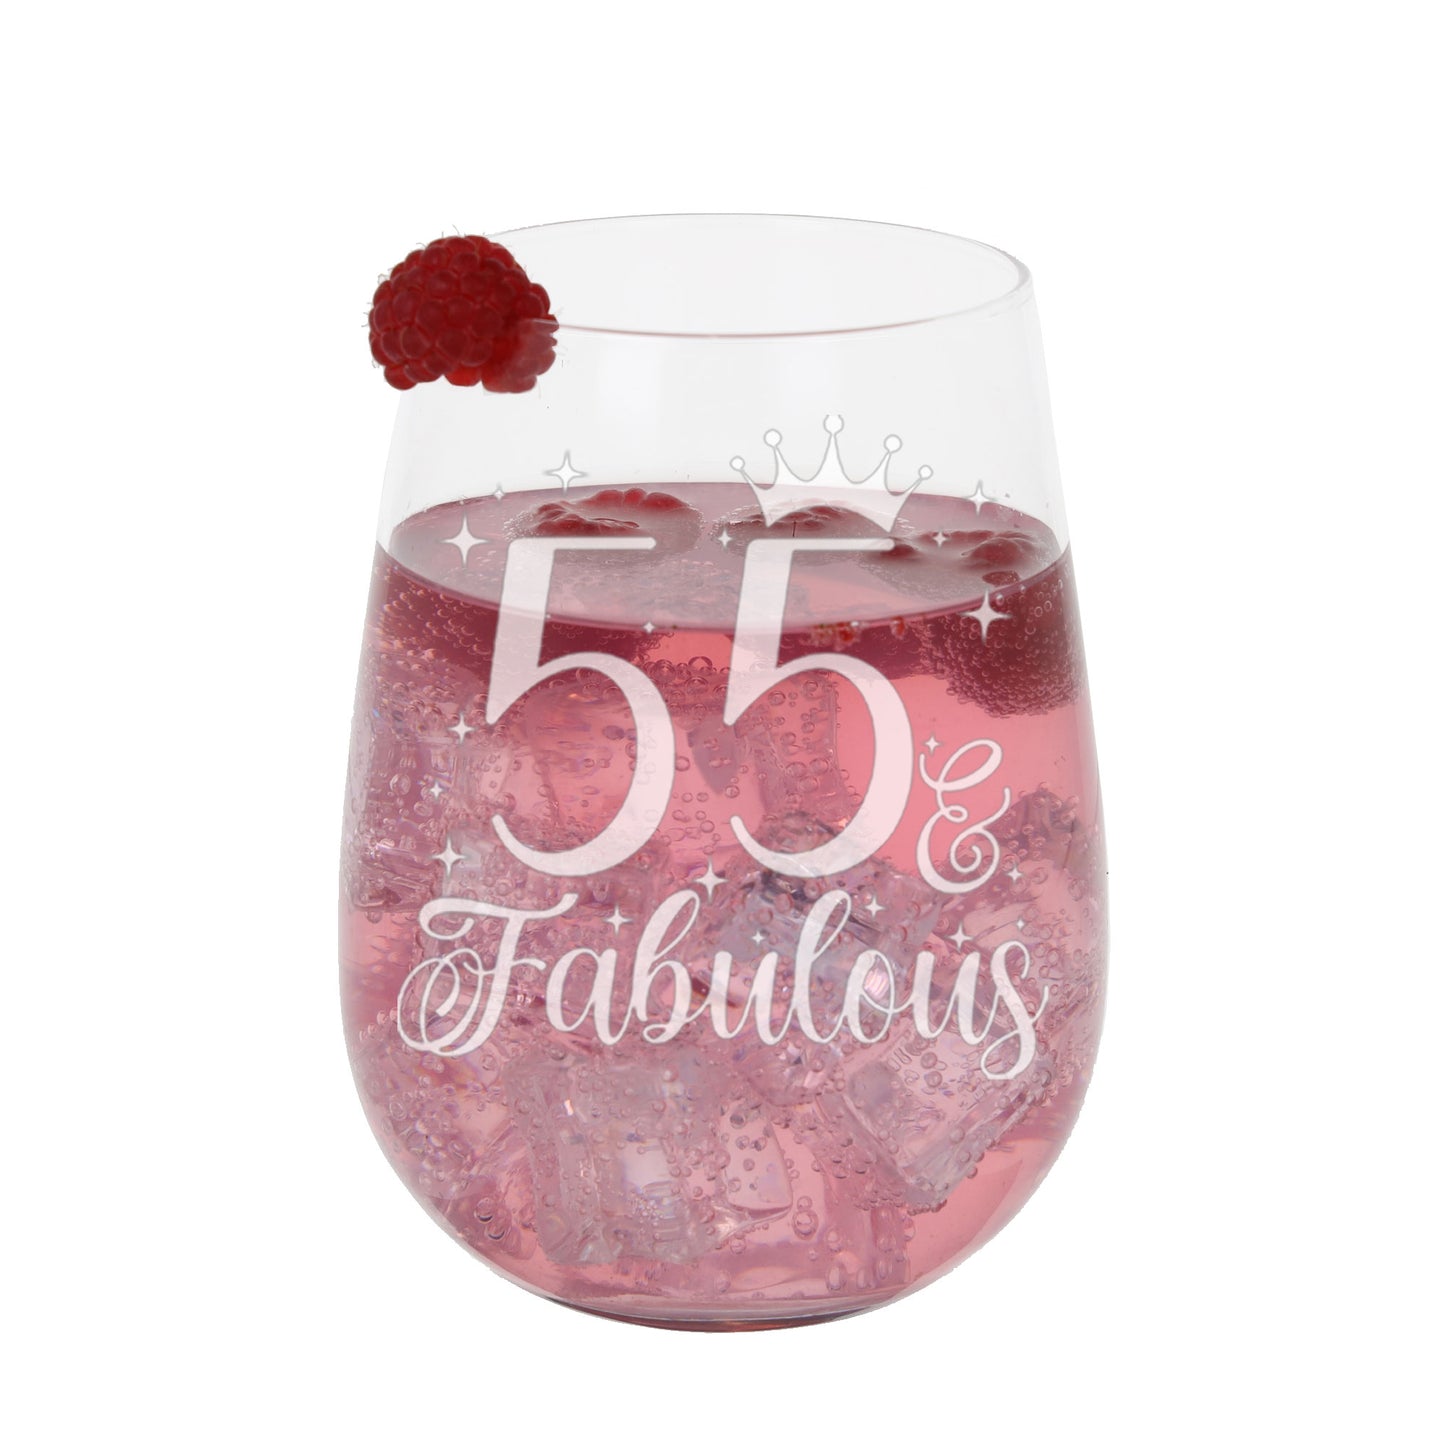 55 & Fabulous Engraved Stemless Gin Glass and/or Coaster Set  - Always Looking Good -   